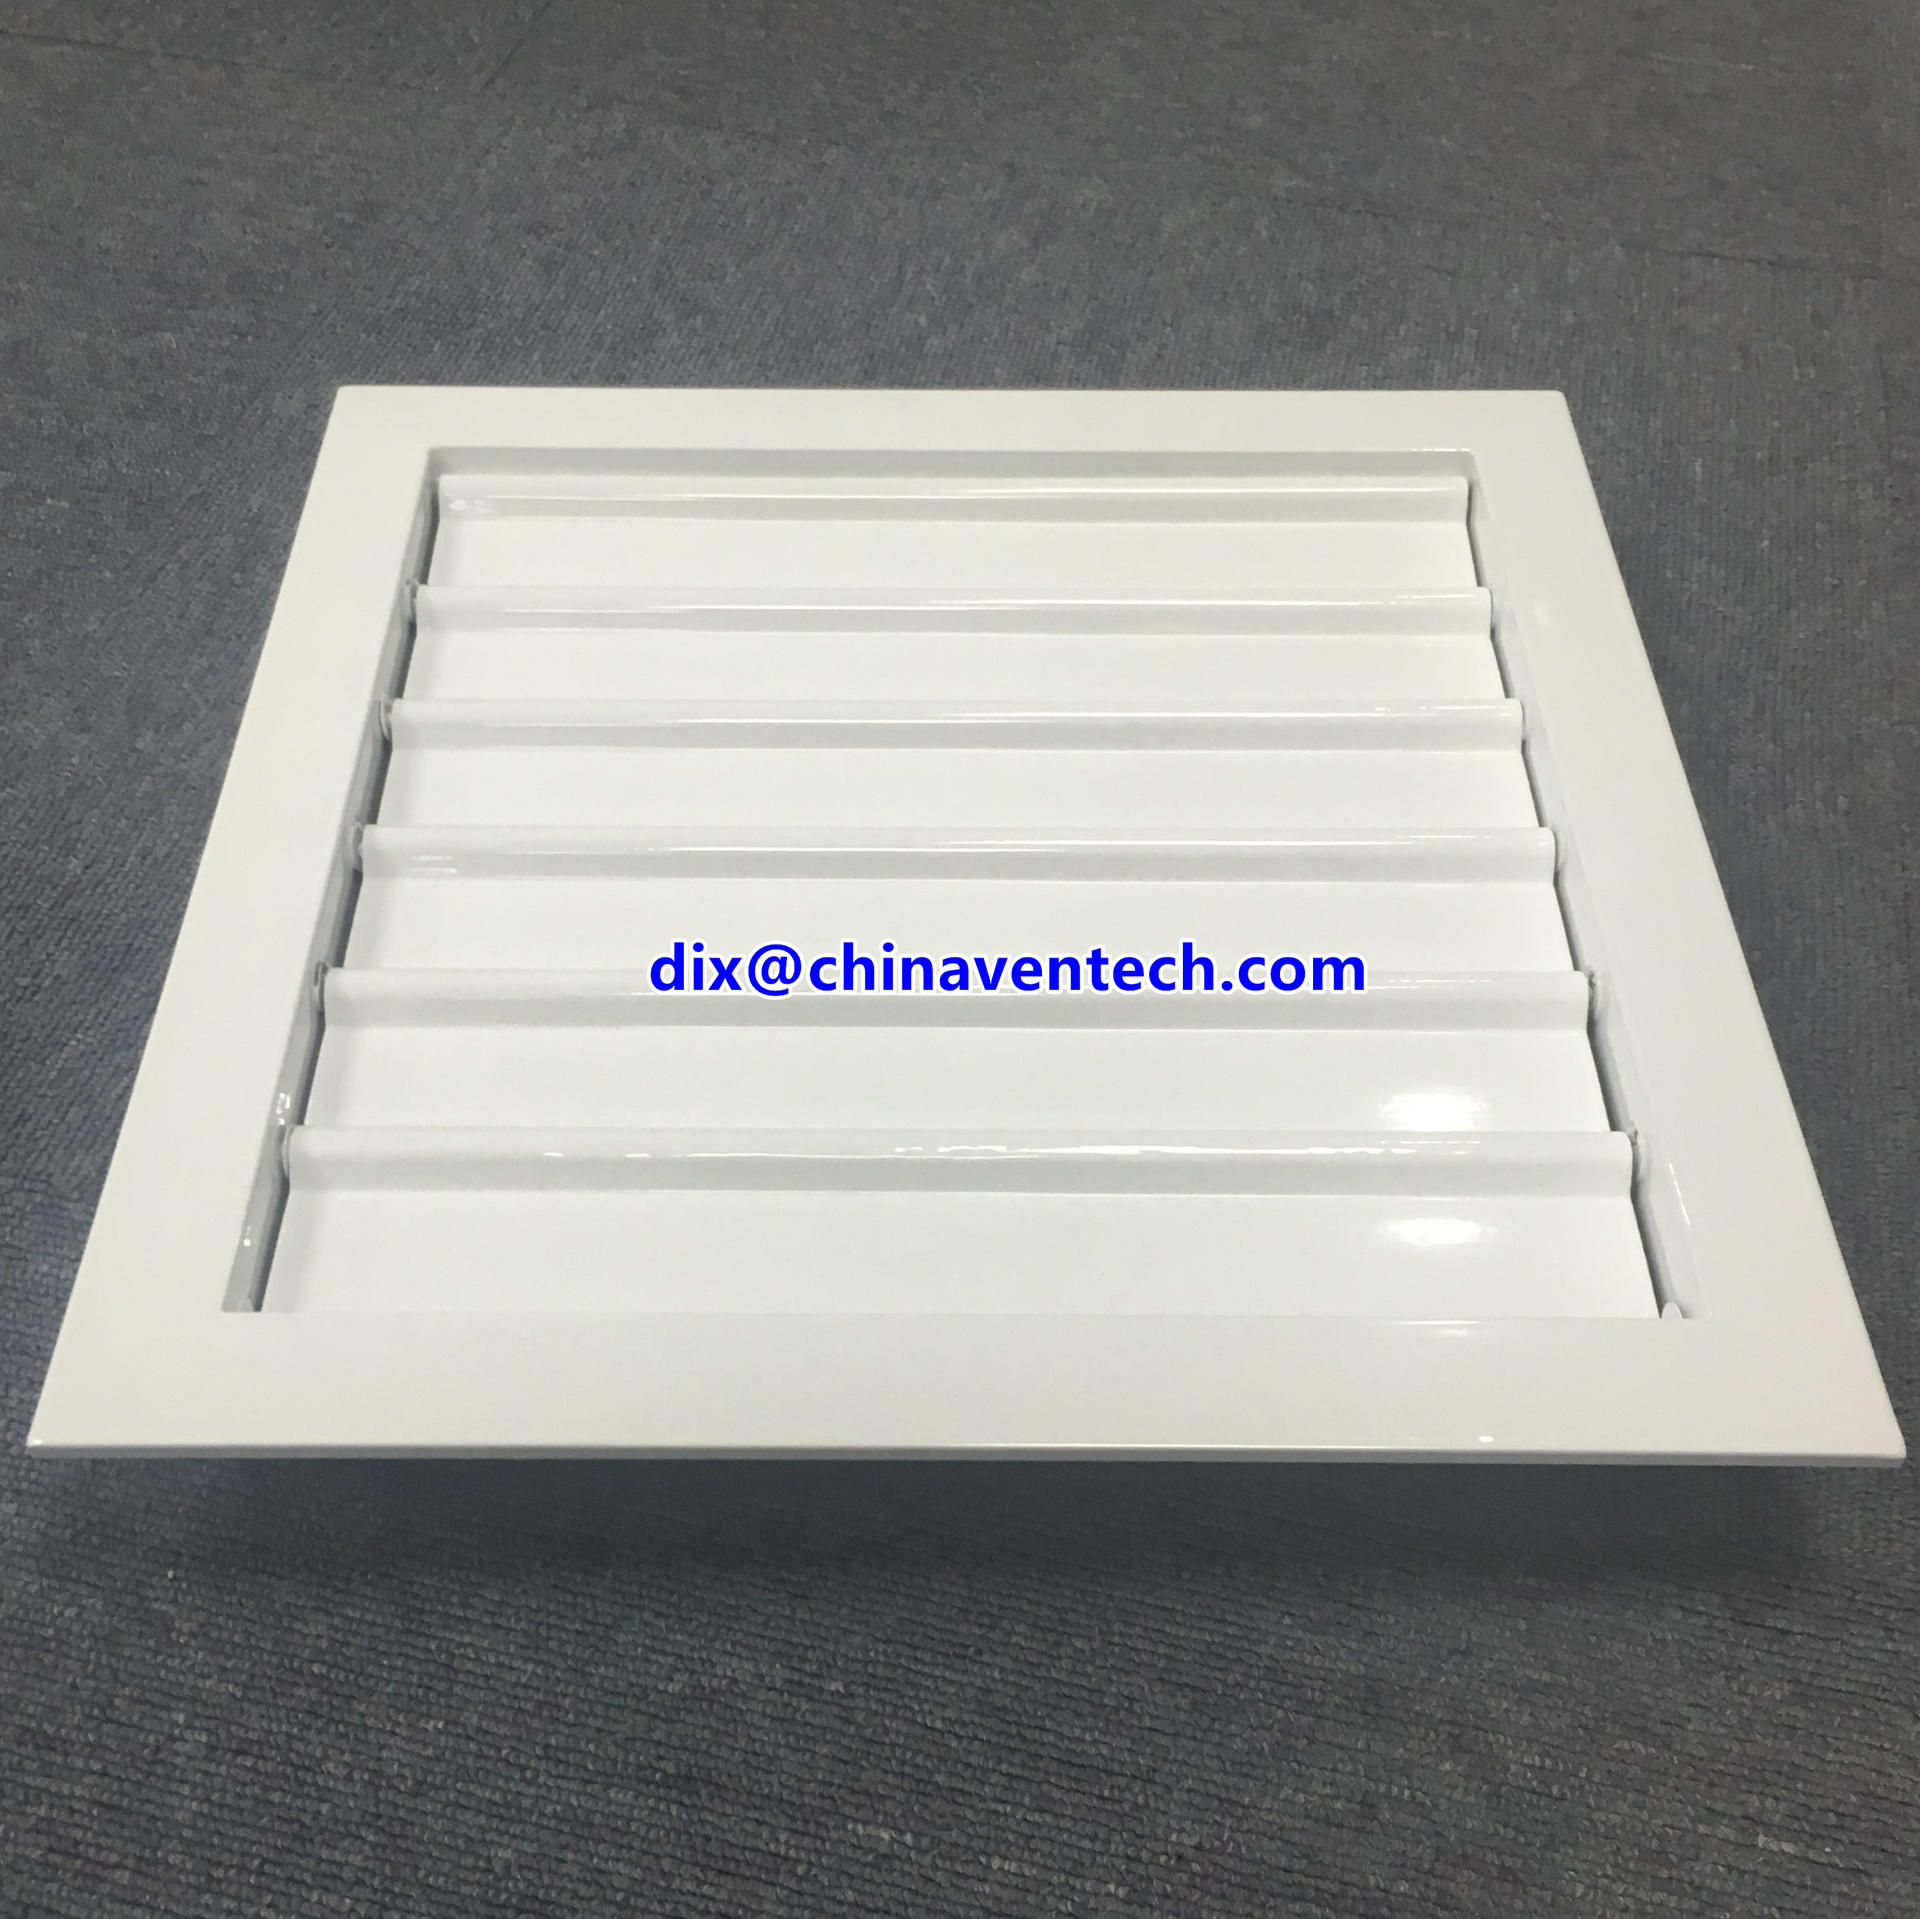 Hvac Transfer Air Shutter Movable-Blade Wall Gravity-operated Louvers